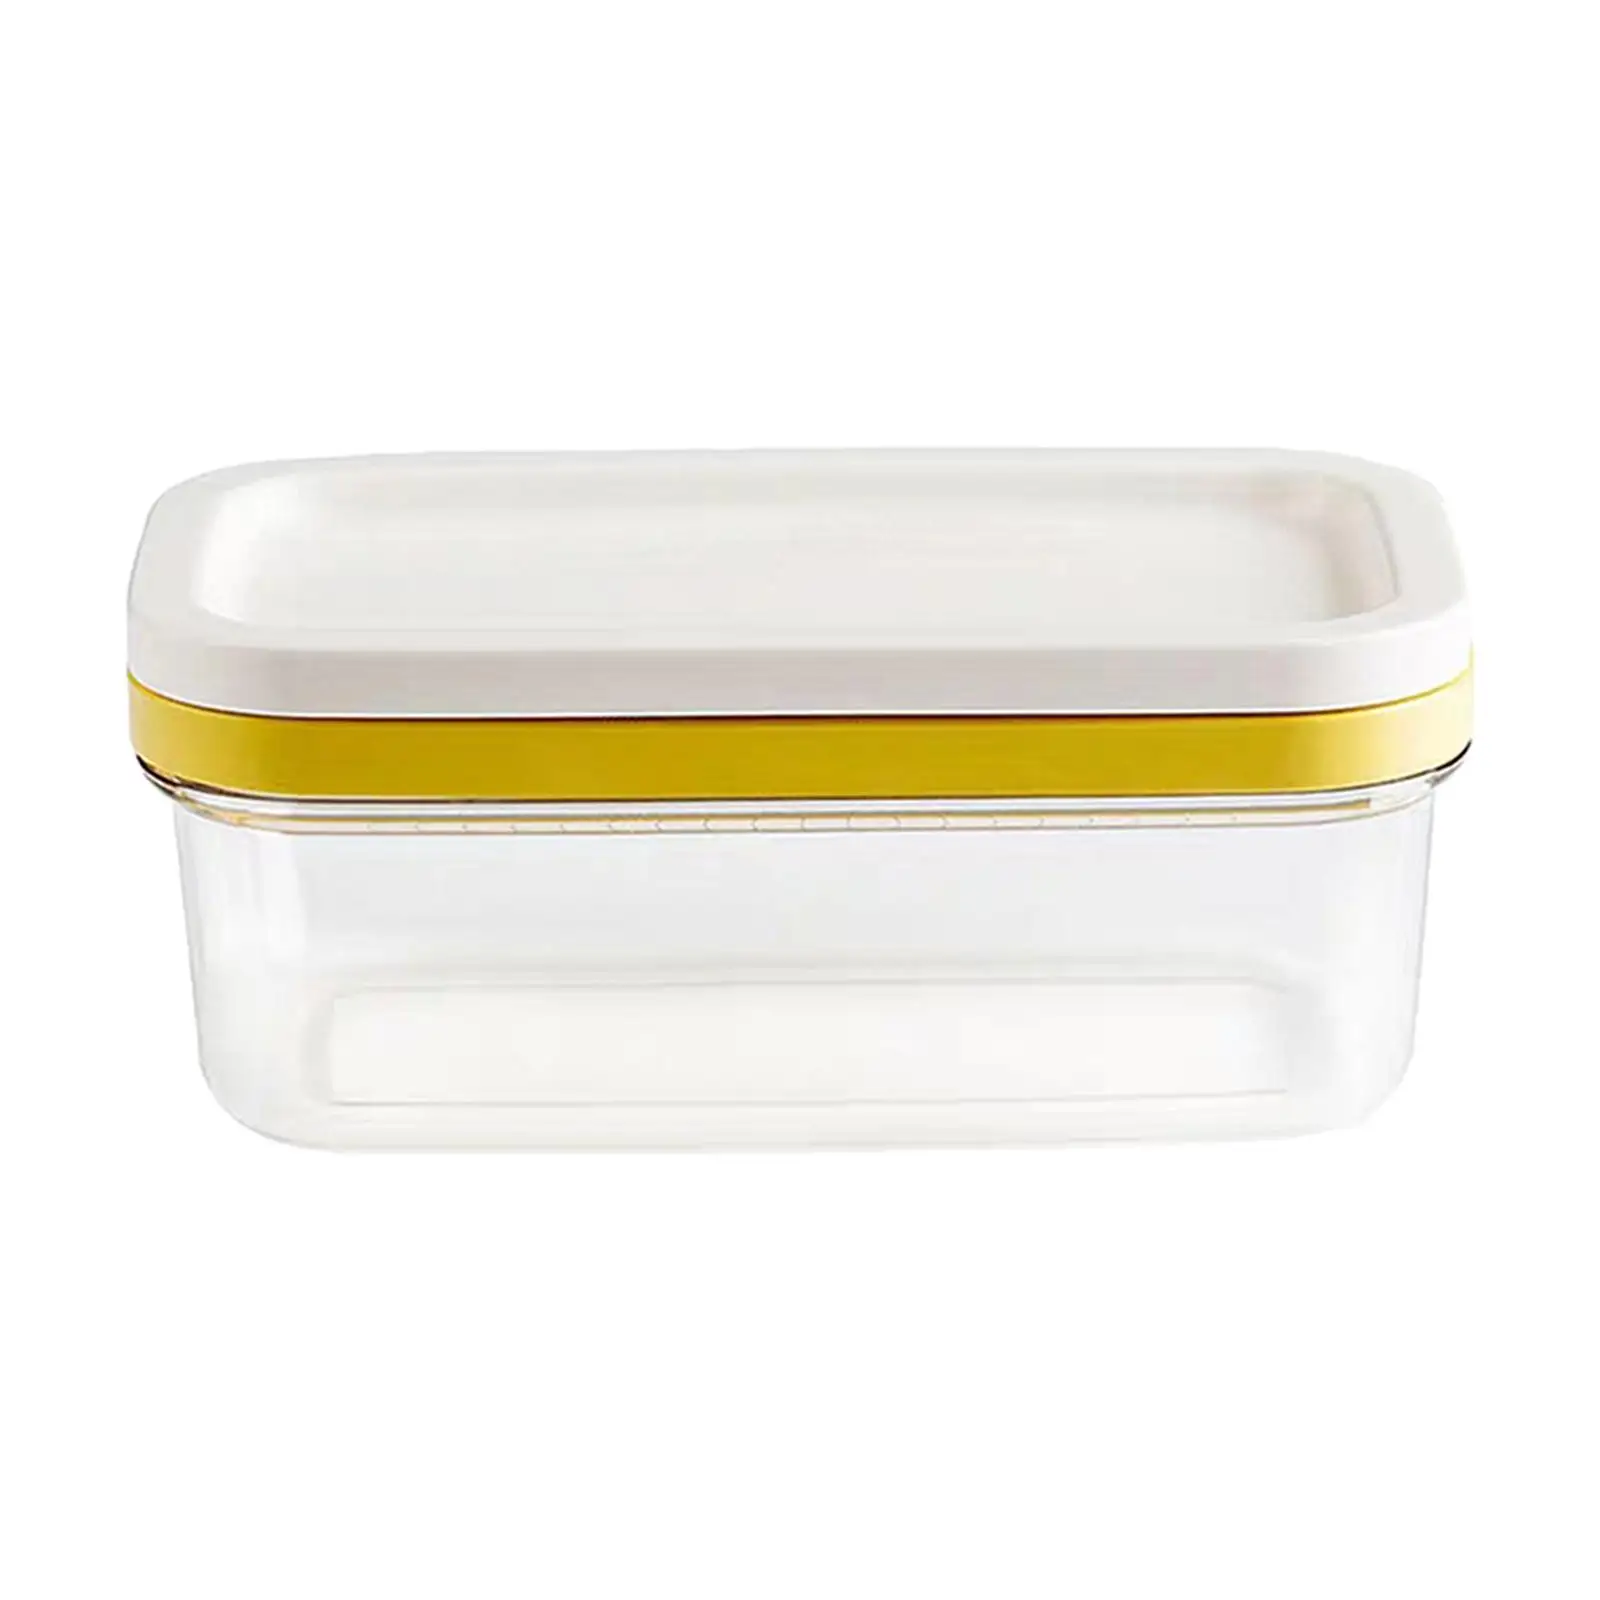 Butter Dish Slicer Countertop Butter Cutting Easy to Cut and Store Transparent Large for Refrigerator Airtight